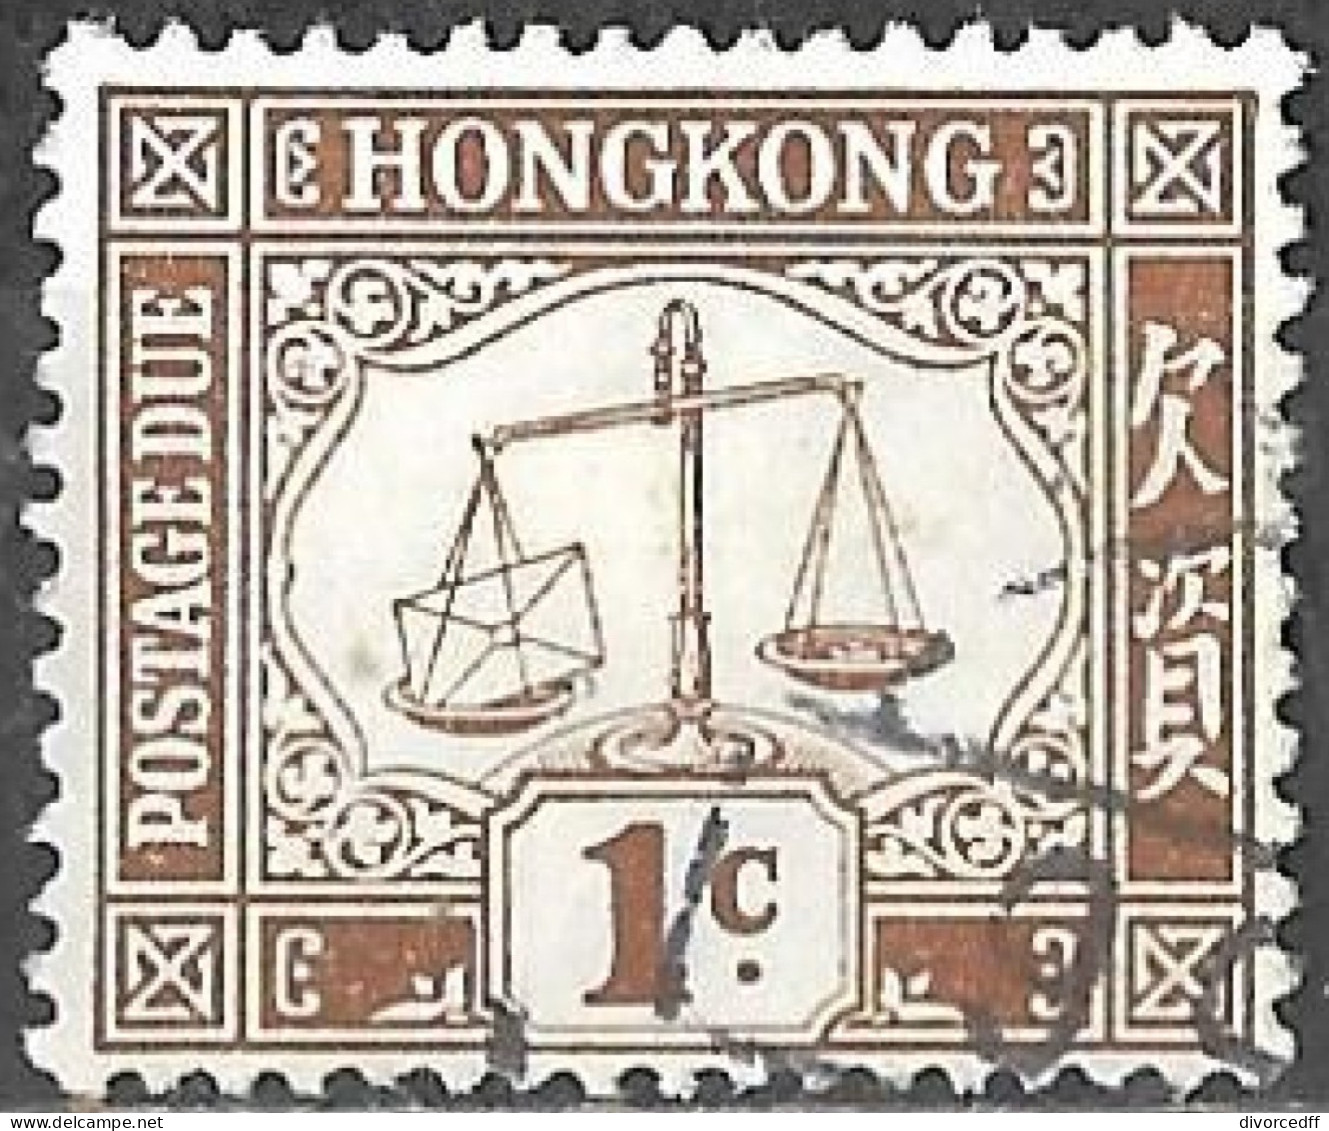 Hong Kong Used Postage Due Stamp Scales Showing Letter Overweight 1 Cent [WLT283] - Postage Due